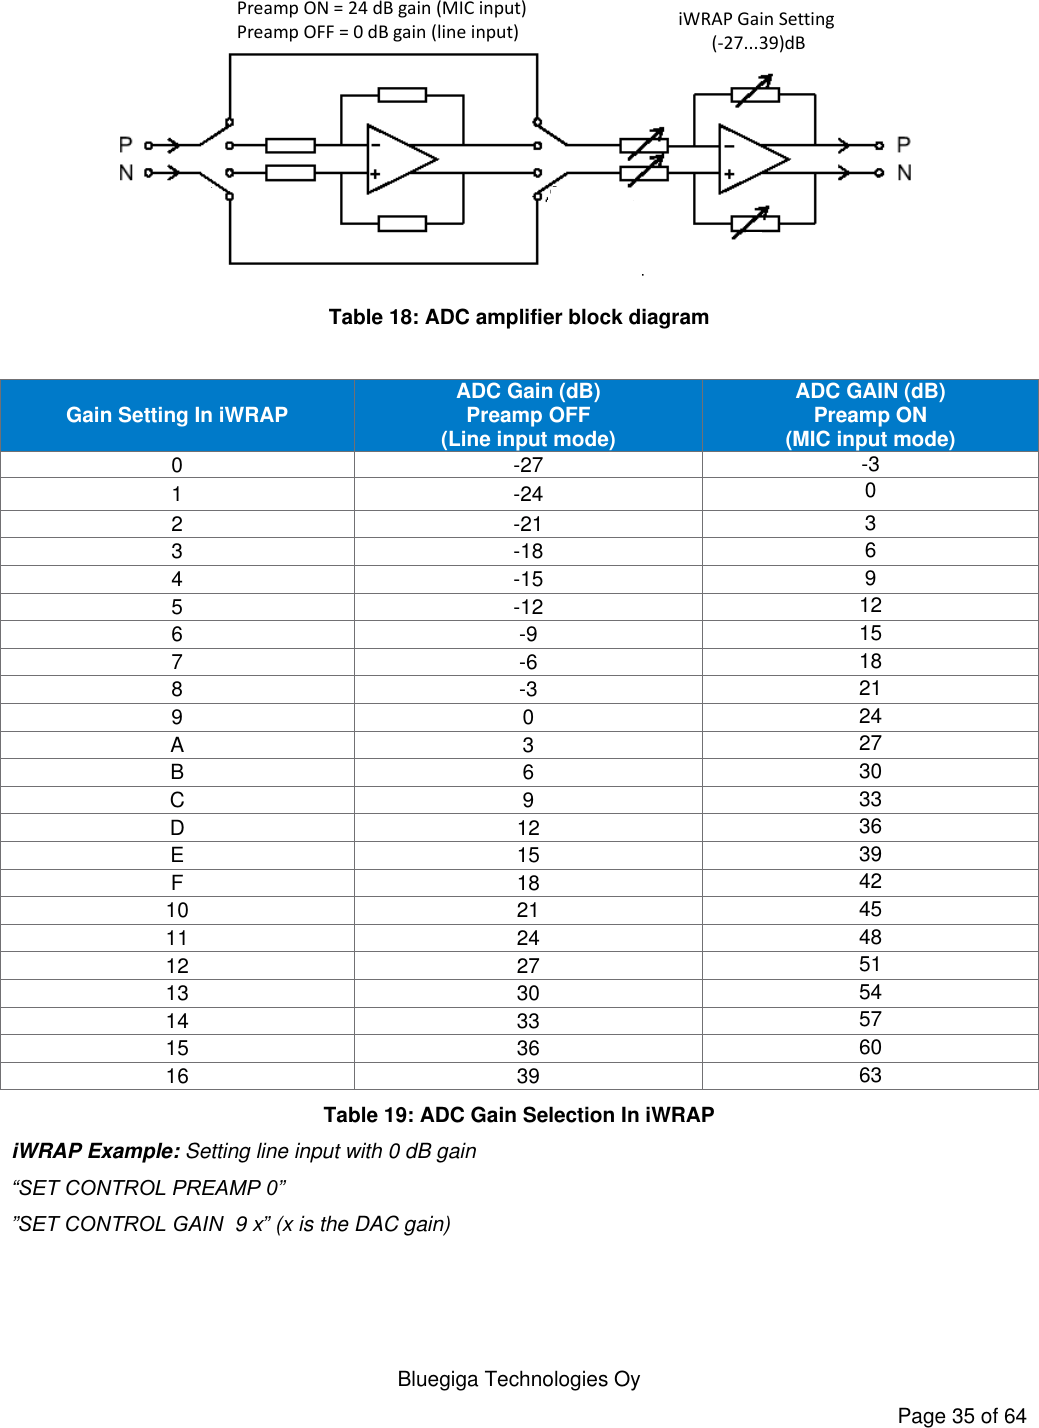   Bluegiga Technologies Oy Page 35 of 64 iWRAP Gain Setting (-27...39)dBPreamp ON = 24 dB gain (MIC input)Preamp OFF = 0 dB gain (line input) Table 18: ADC amplifier block diagram  Gain Setting In iWRAP ADC Gain (dB) Preamp OFF (Line input mode) ADC GAIN (dB) Preamp ON (MIC input mode) 0 -27 -3 1 -24 0 2 -21 3 3 -18 6 4 -15 9 5 -12 12 6 -9 15 7 -6 18 8 -3 21 9 0 24 A 3 27 B 6 30 C 9 33 D 12 36 E 15 39 F 18 42 10 21 45 11 24 48 12 27 51 13 30 54 14 33 57 15 36 60 16 39 63 Table 19: ADC Gain Selection In iWRAP iWRAP Example: Setting line input with 0 dB gain  “SET CONTROL PREAMP 0” ”SET CONTROL GAIN  9 x” (x is the DAC gain)  